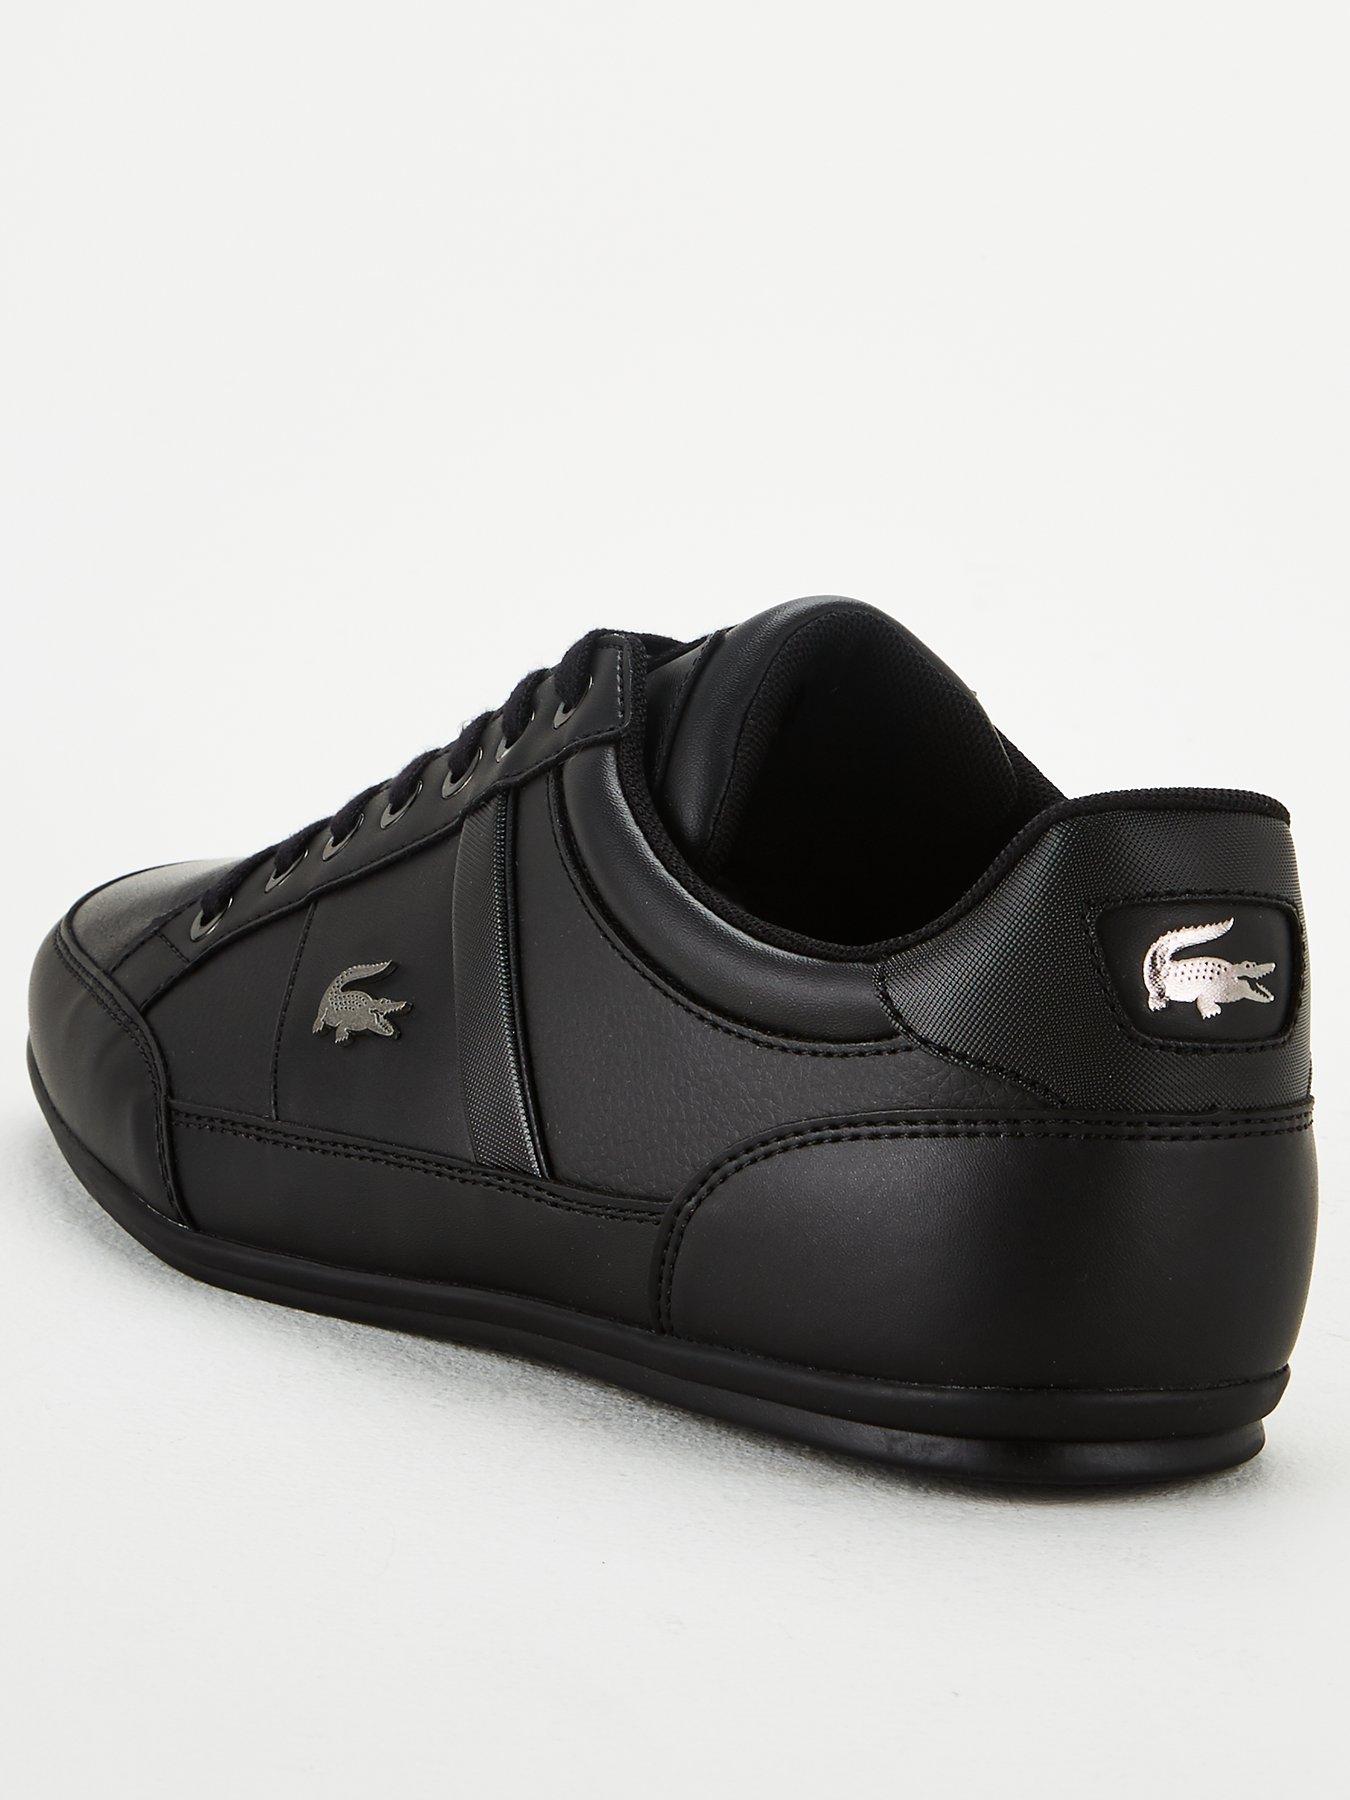 lacoste trainers uk